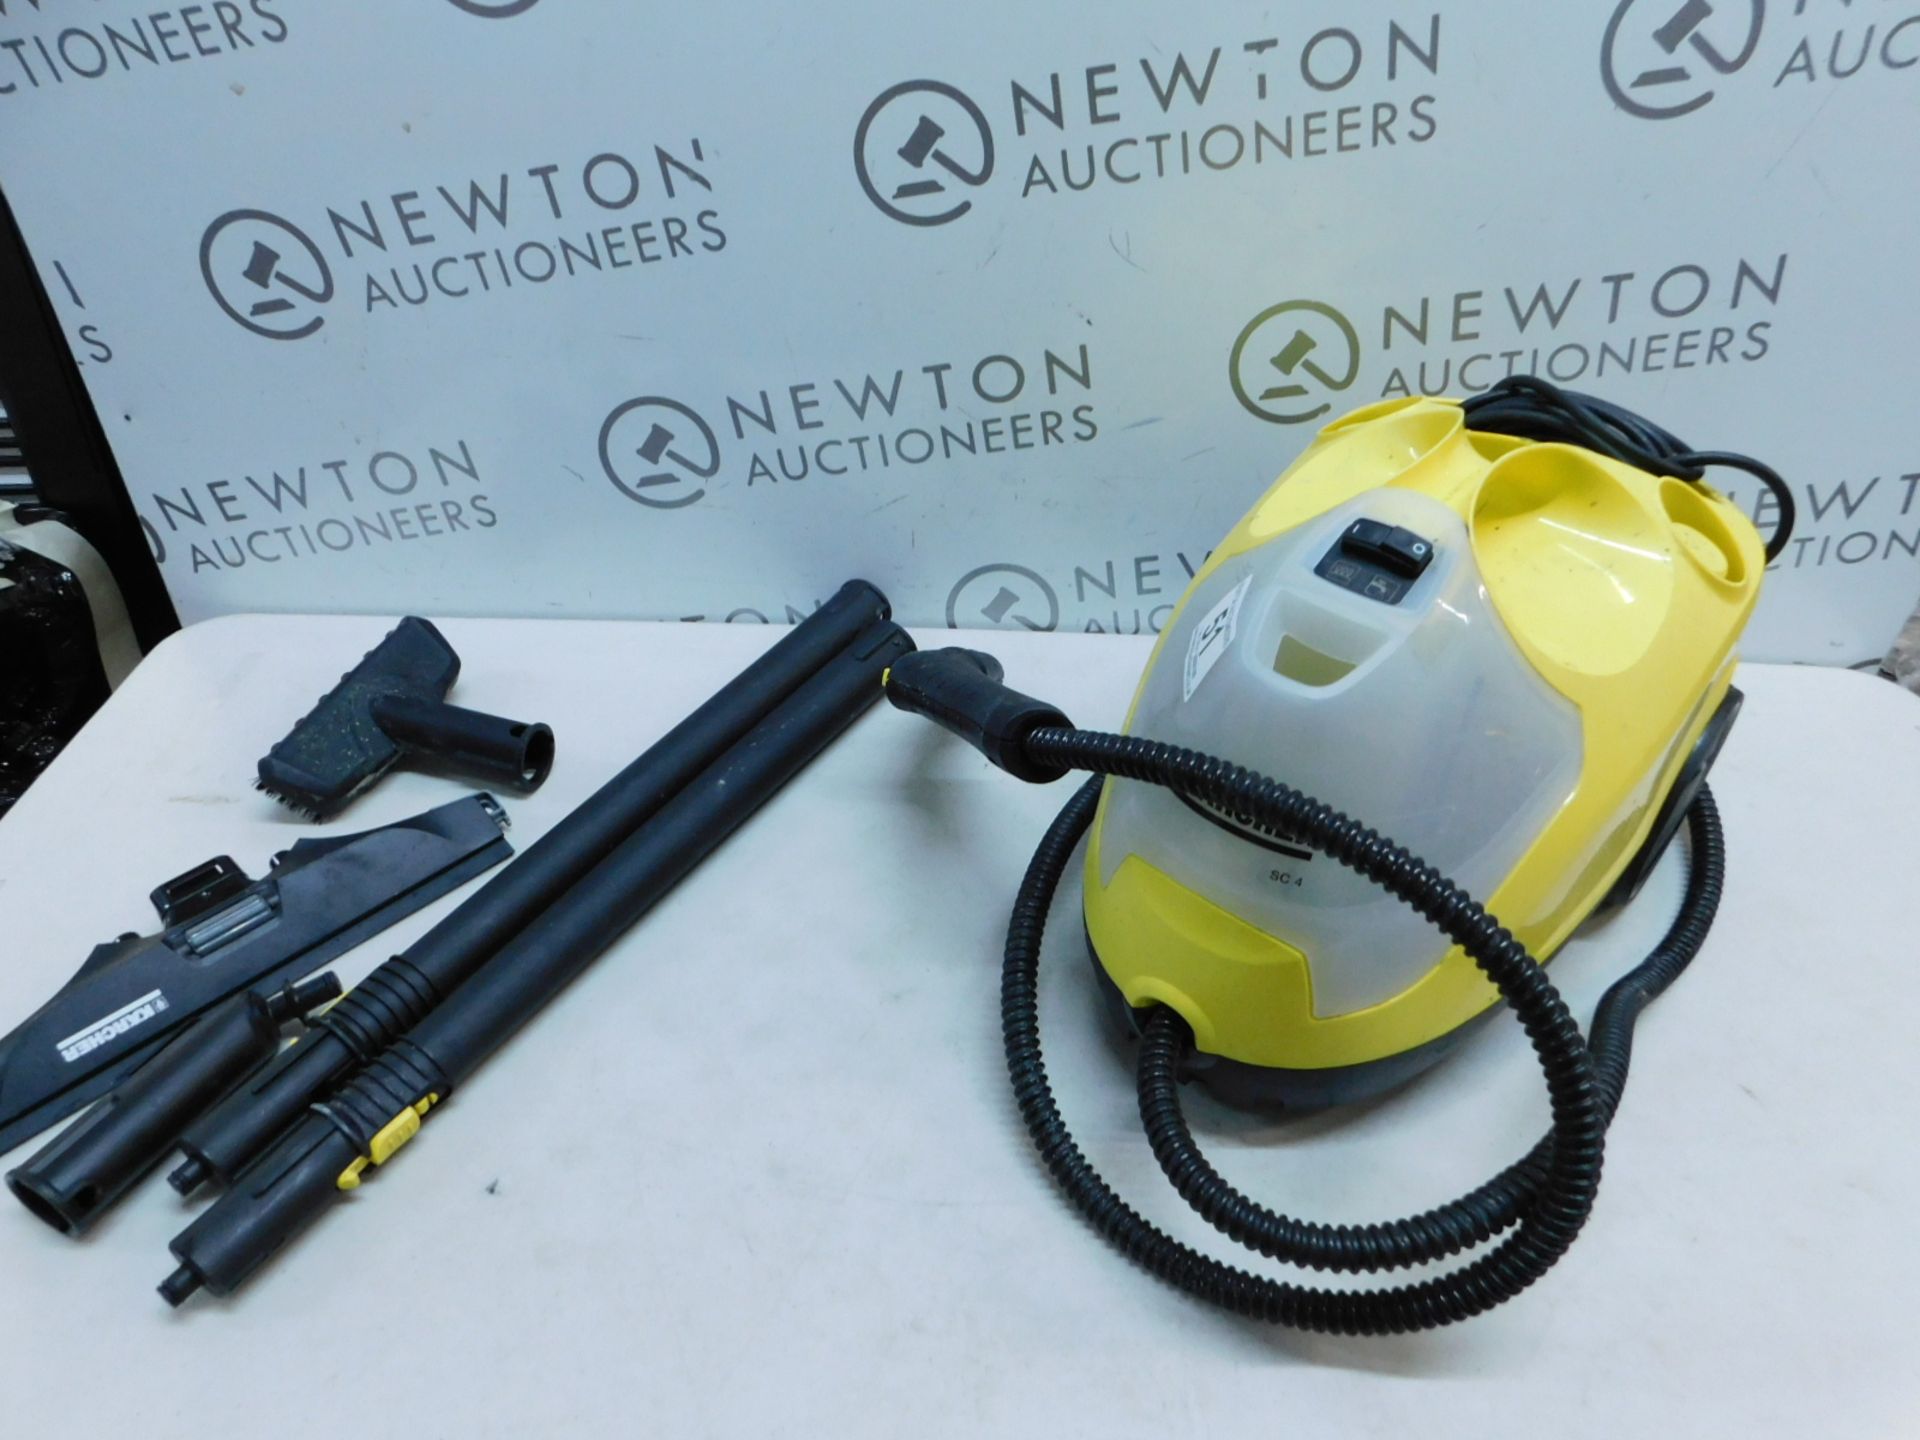 1 KARCHER SC4 STEAM CLEANER WITH ACCESSORIES RRP Â£229.99